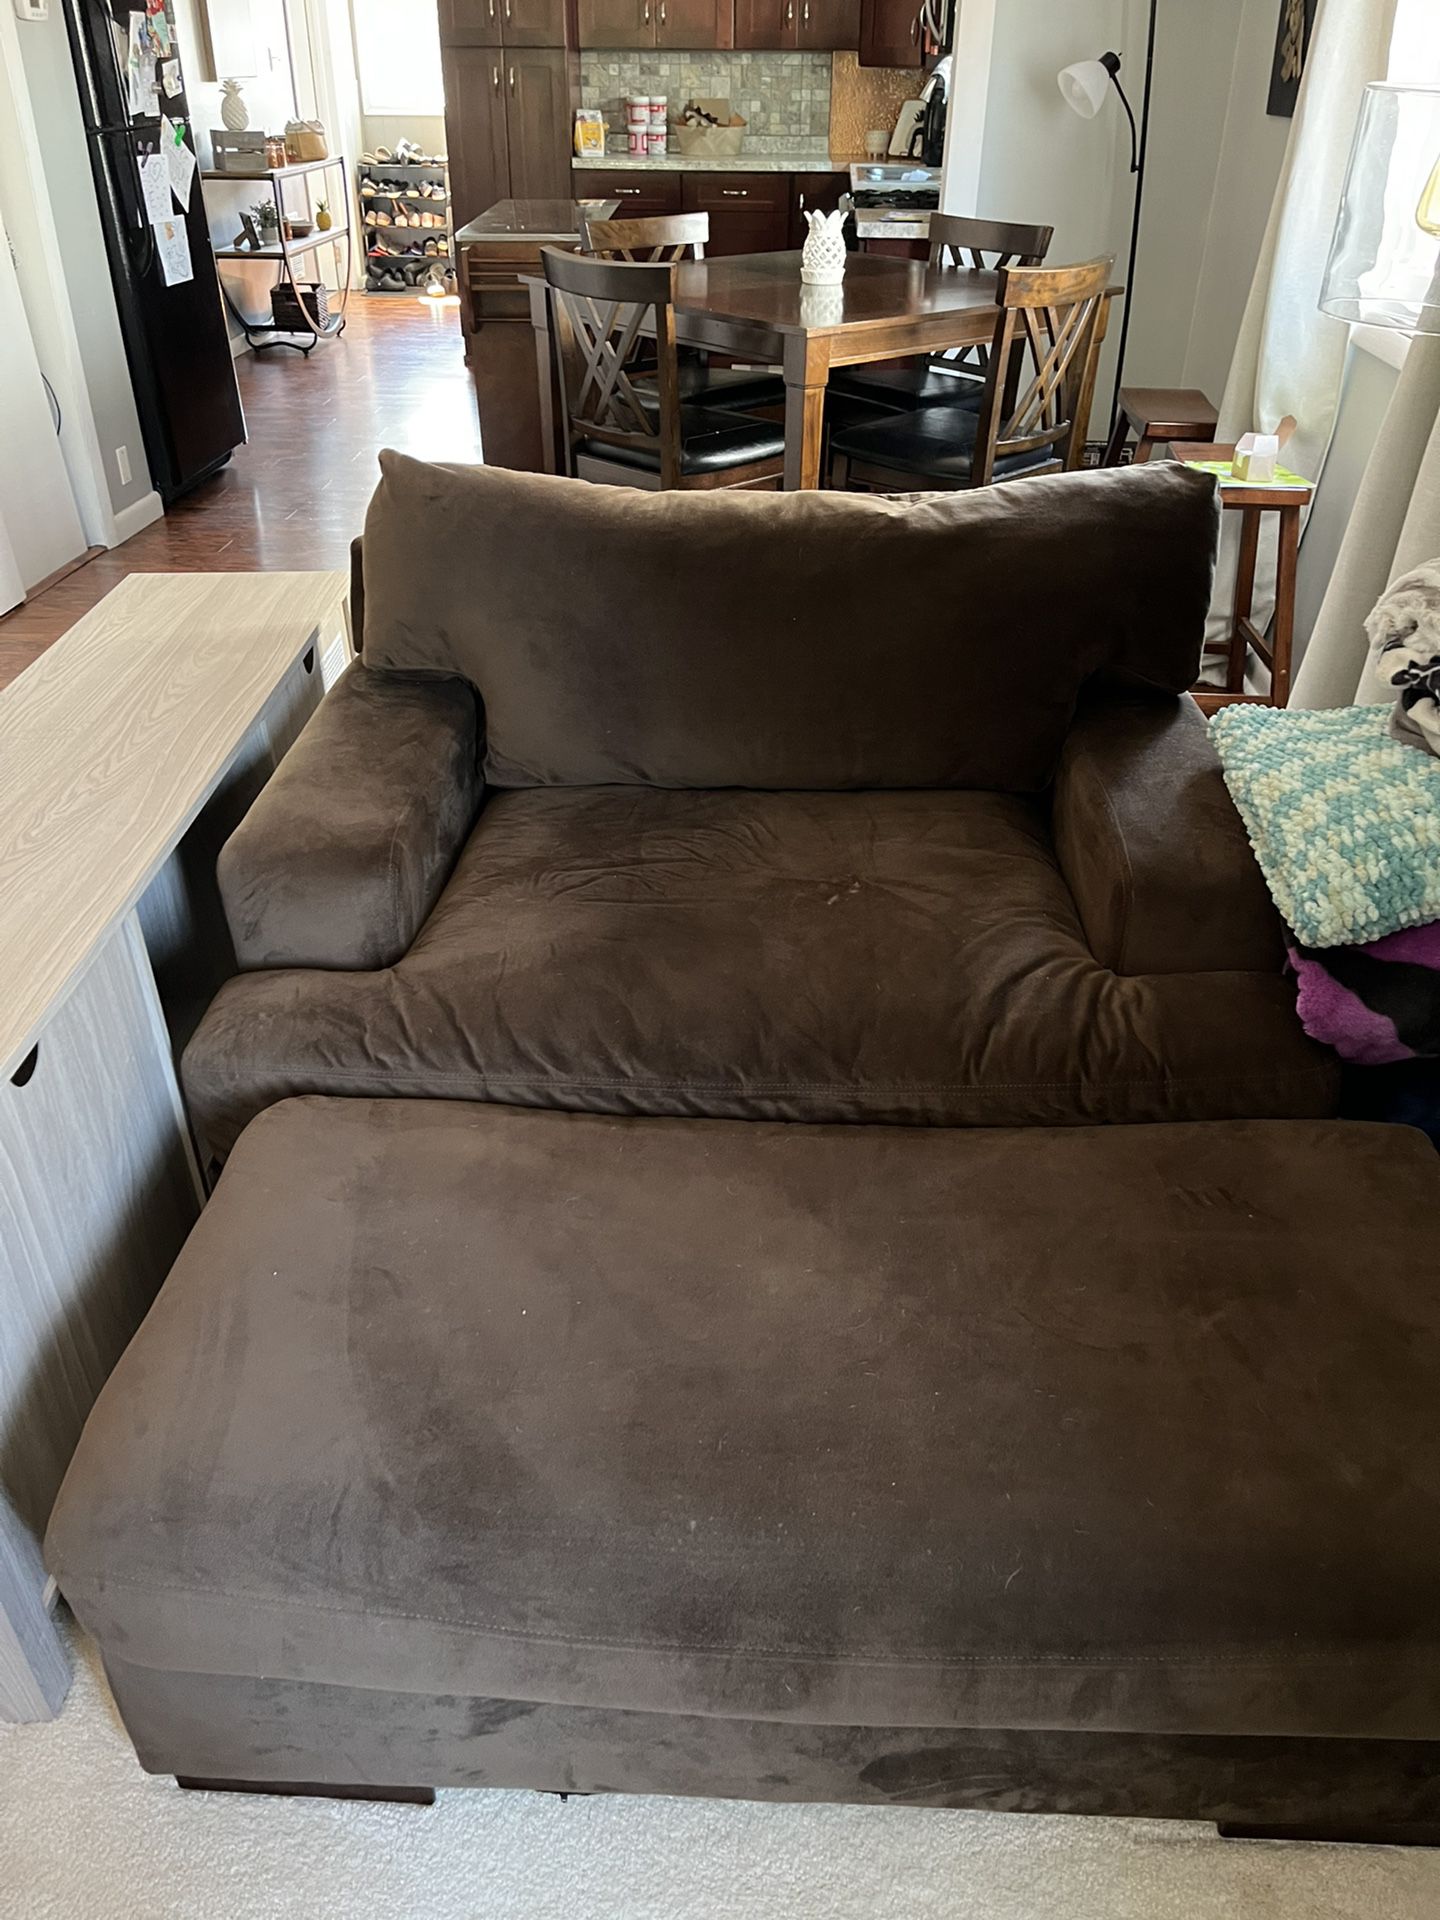 Chair And Couch